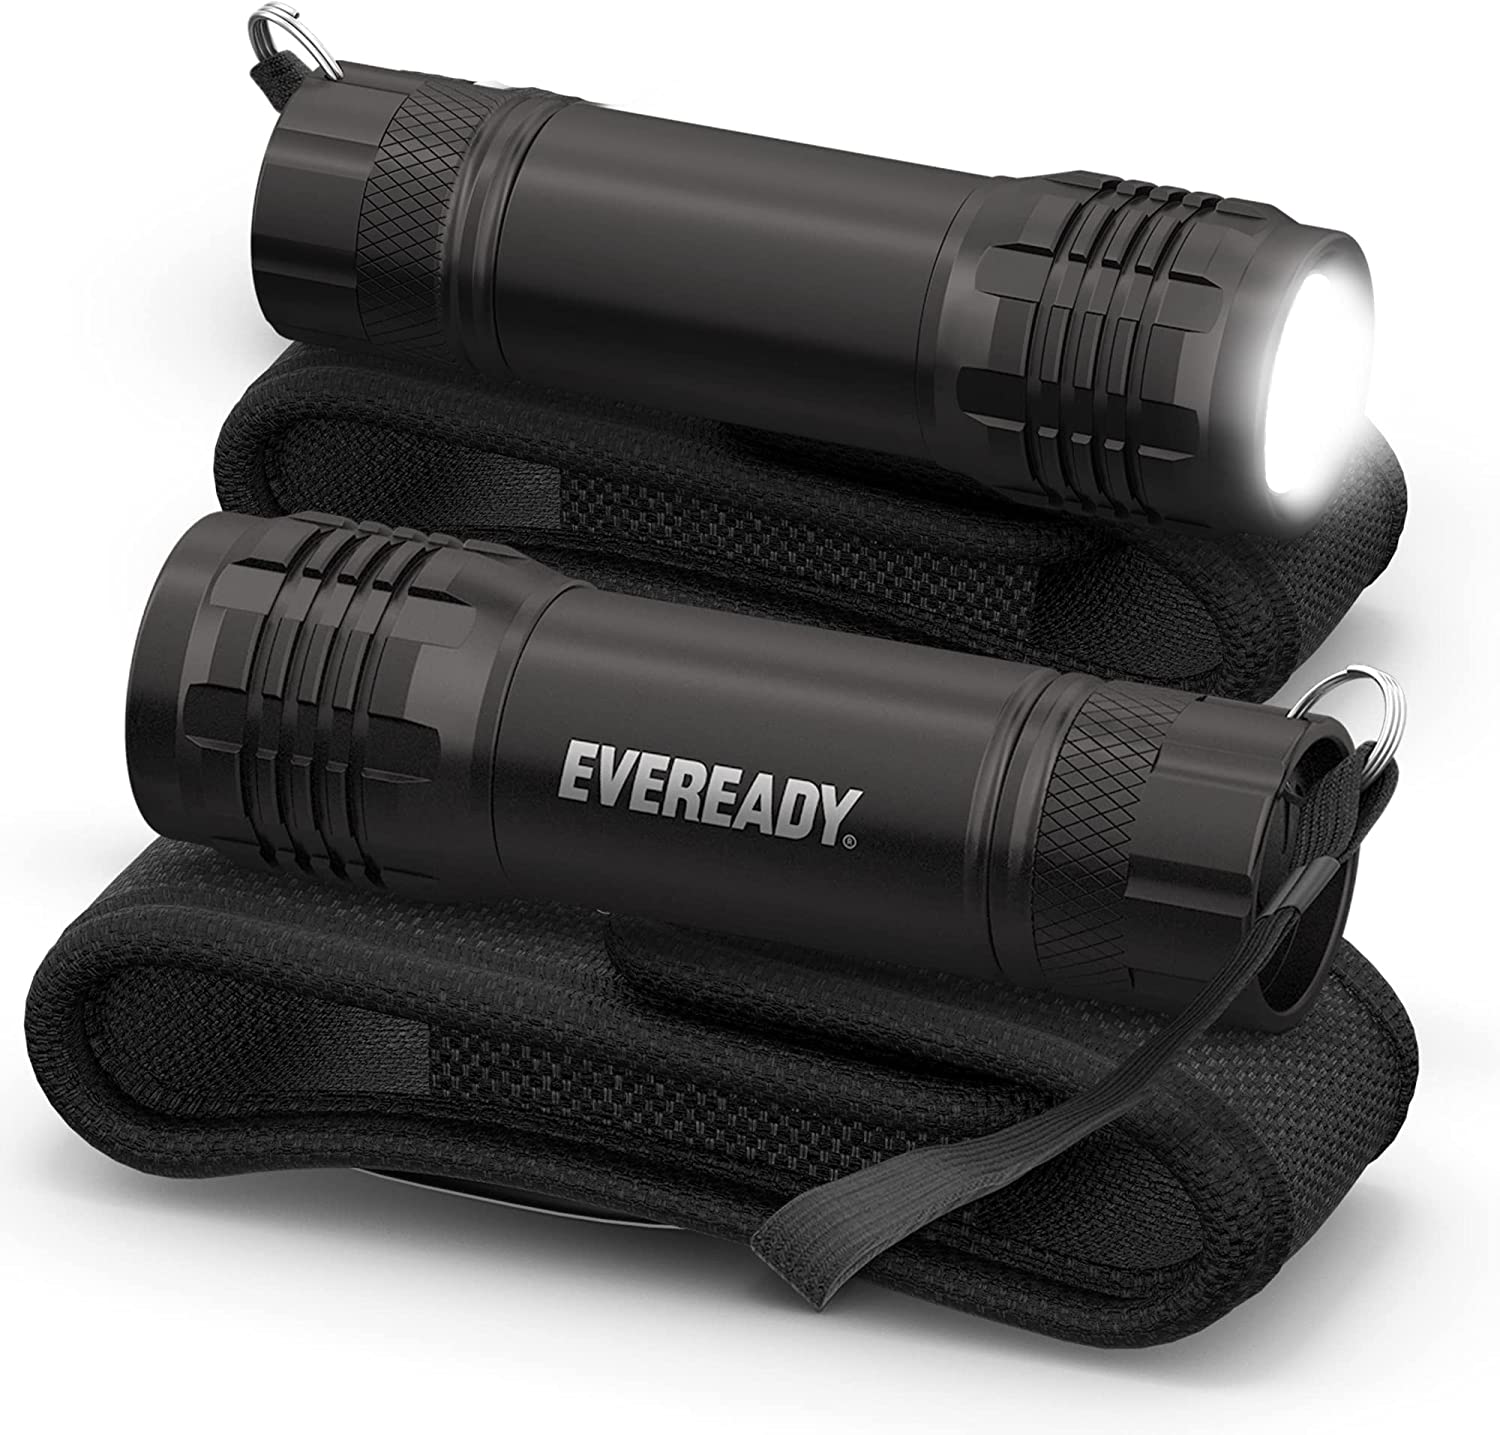 2-Pack Eveready S300 LED Tactical Flashlights w/ Holsters $6.50 ($3.25 Each) + FS w/ Prime or on $25+